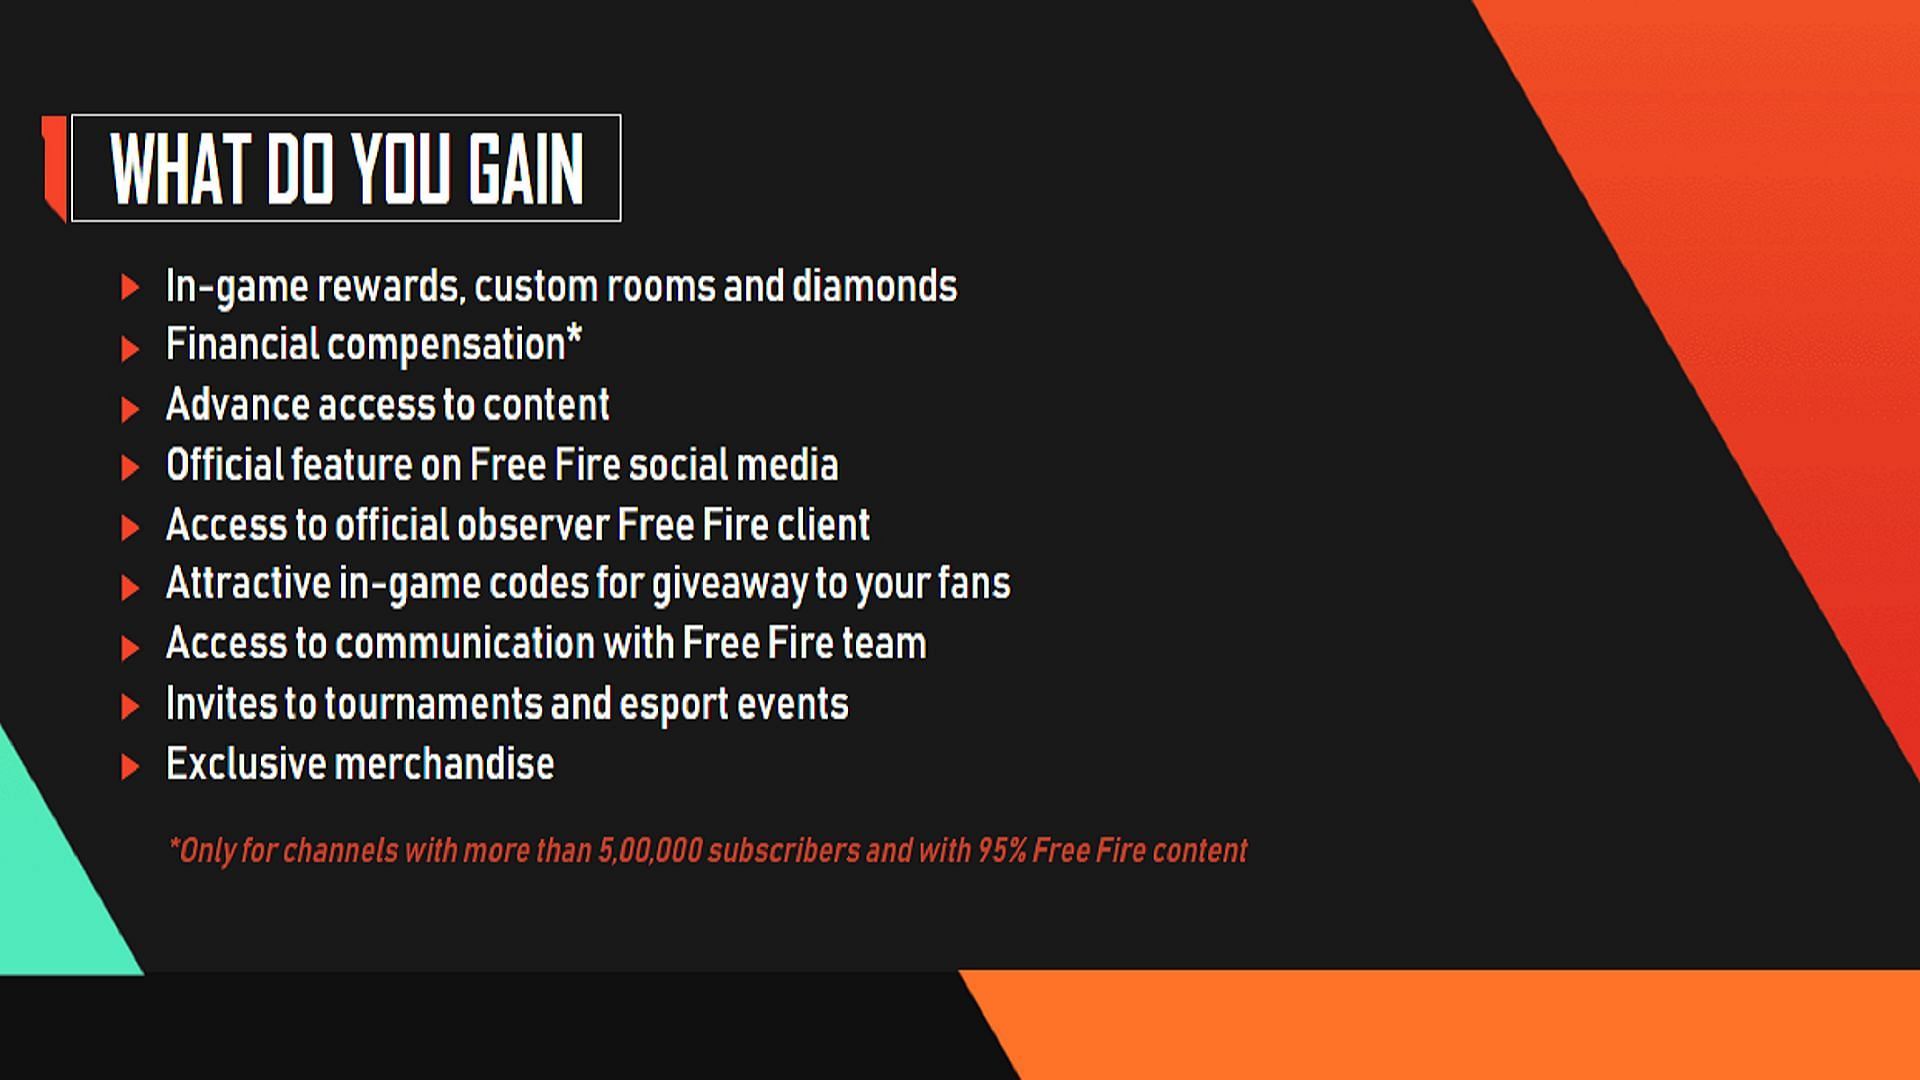 List of benefits mentioned by the developers (Image via Garena)